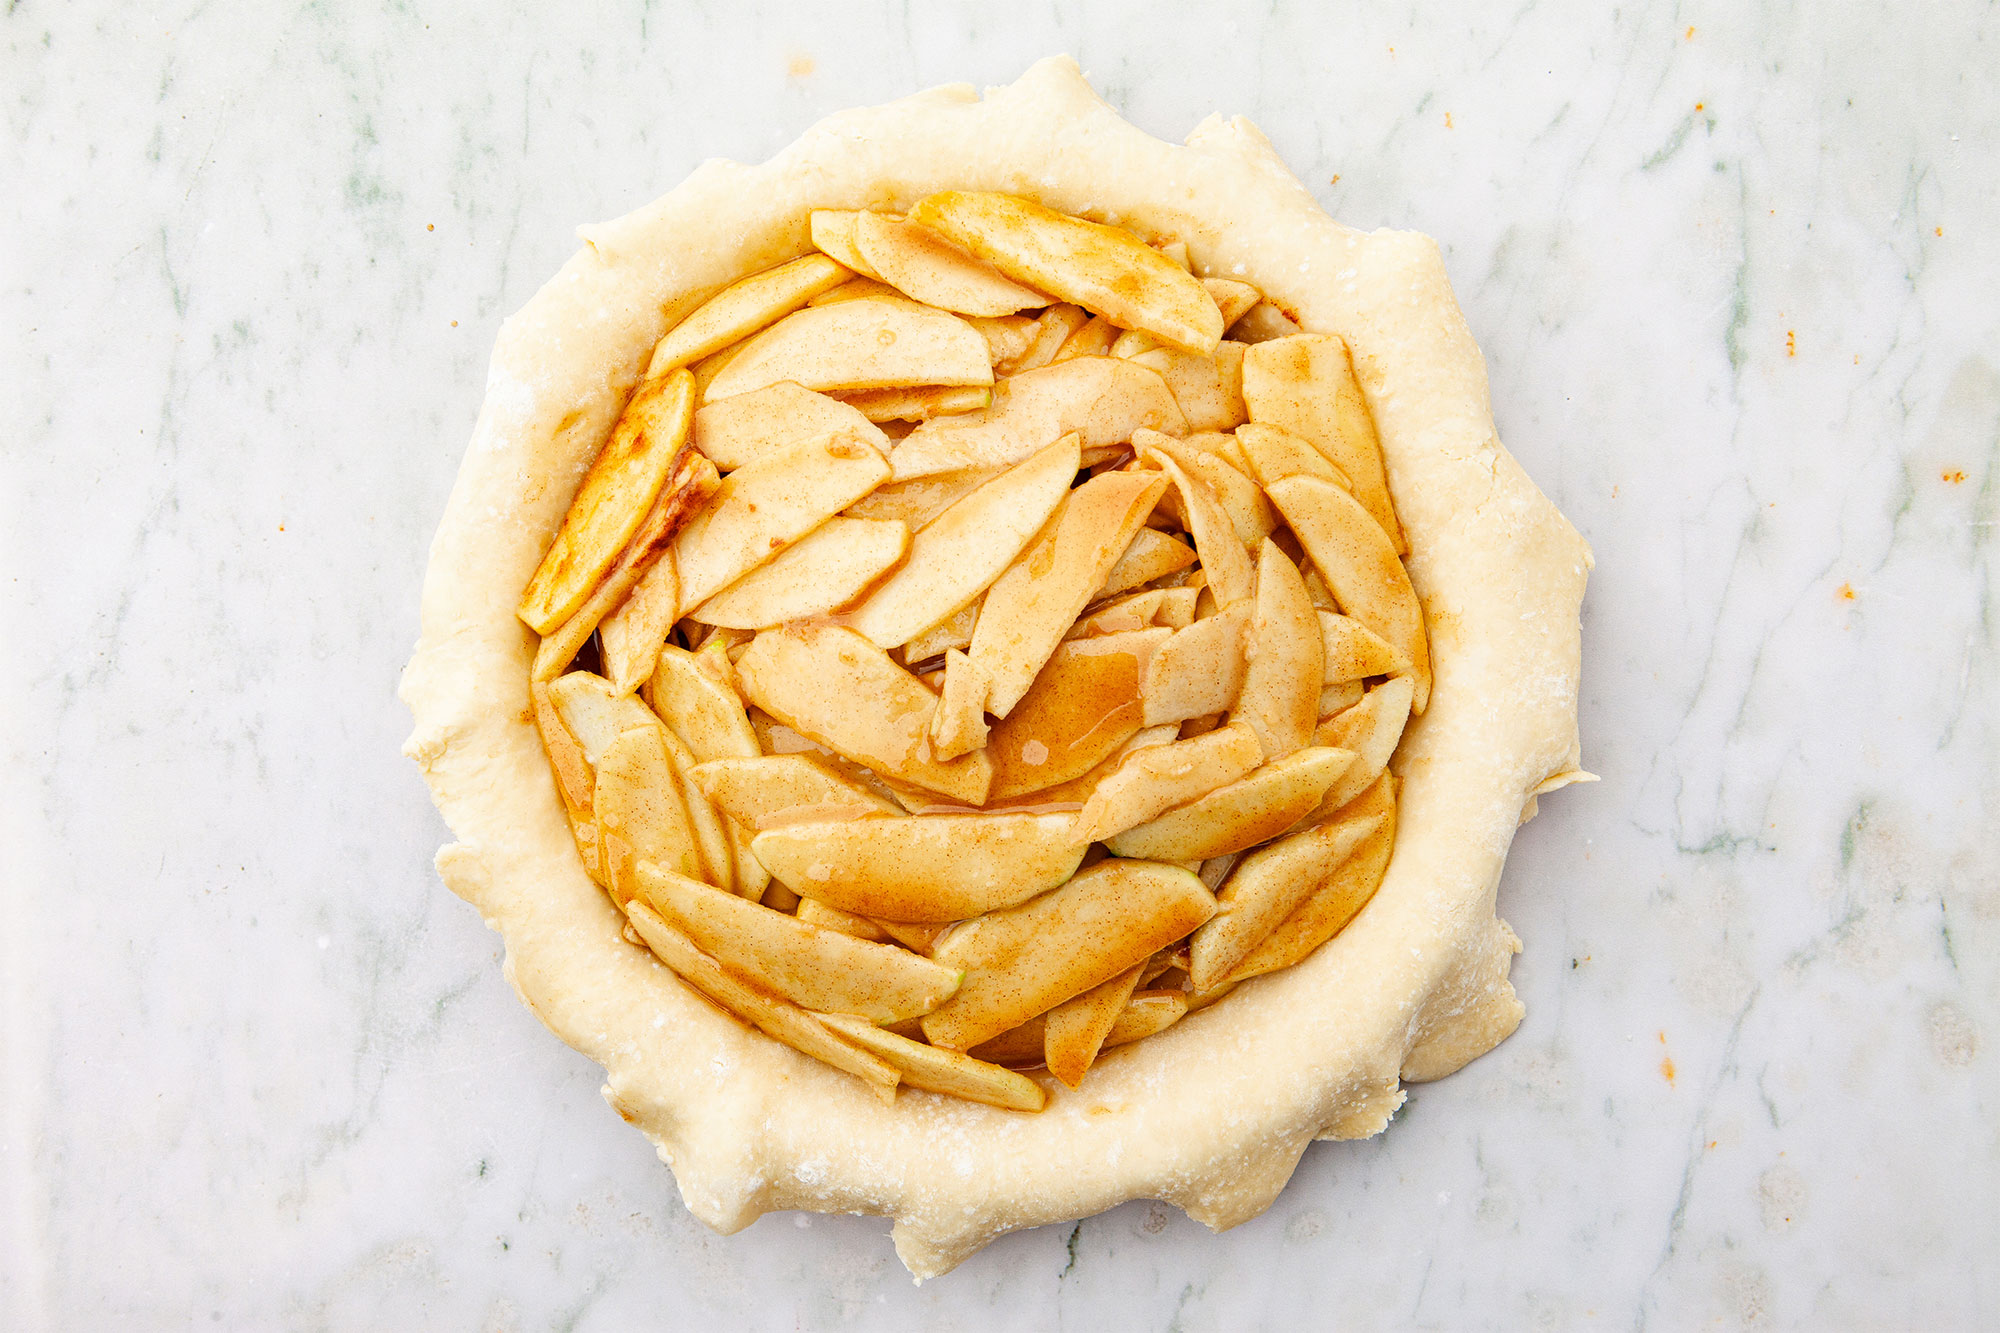 A bottom crust filled with apples.